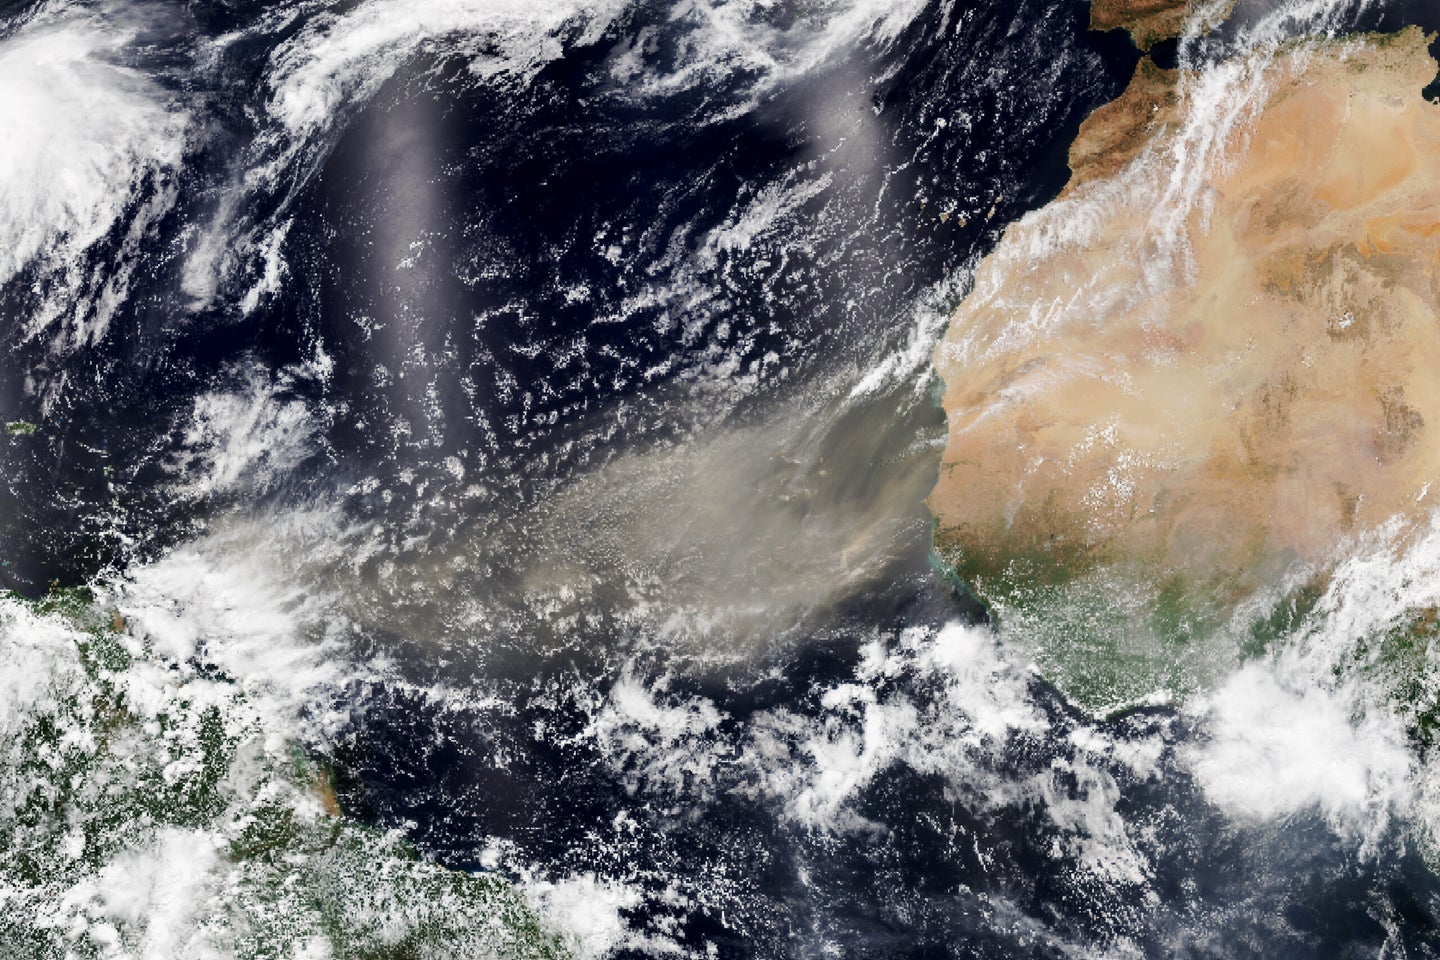 A satellite image of the western coast of Africa. A grey haze extends out over the Atlantic Ocean from the desert.